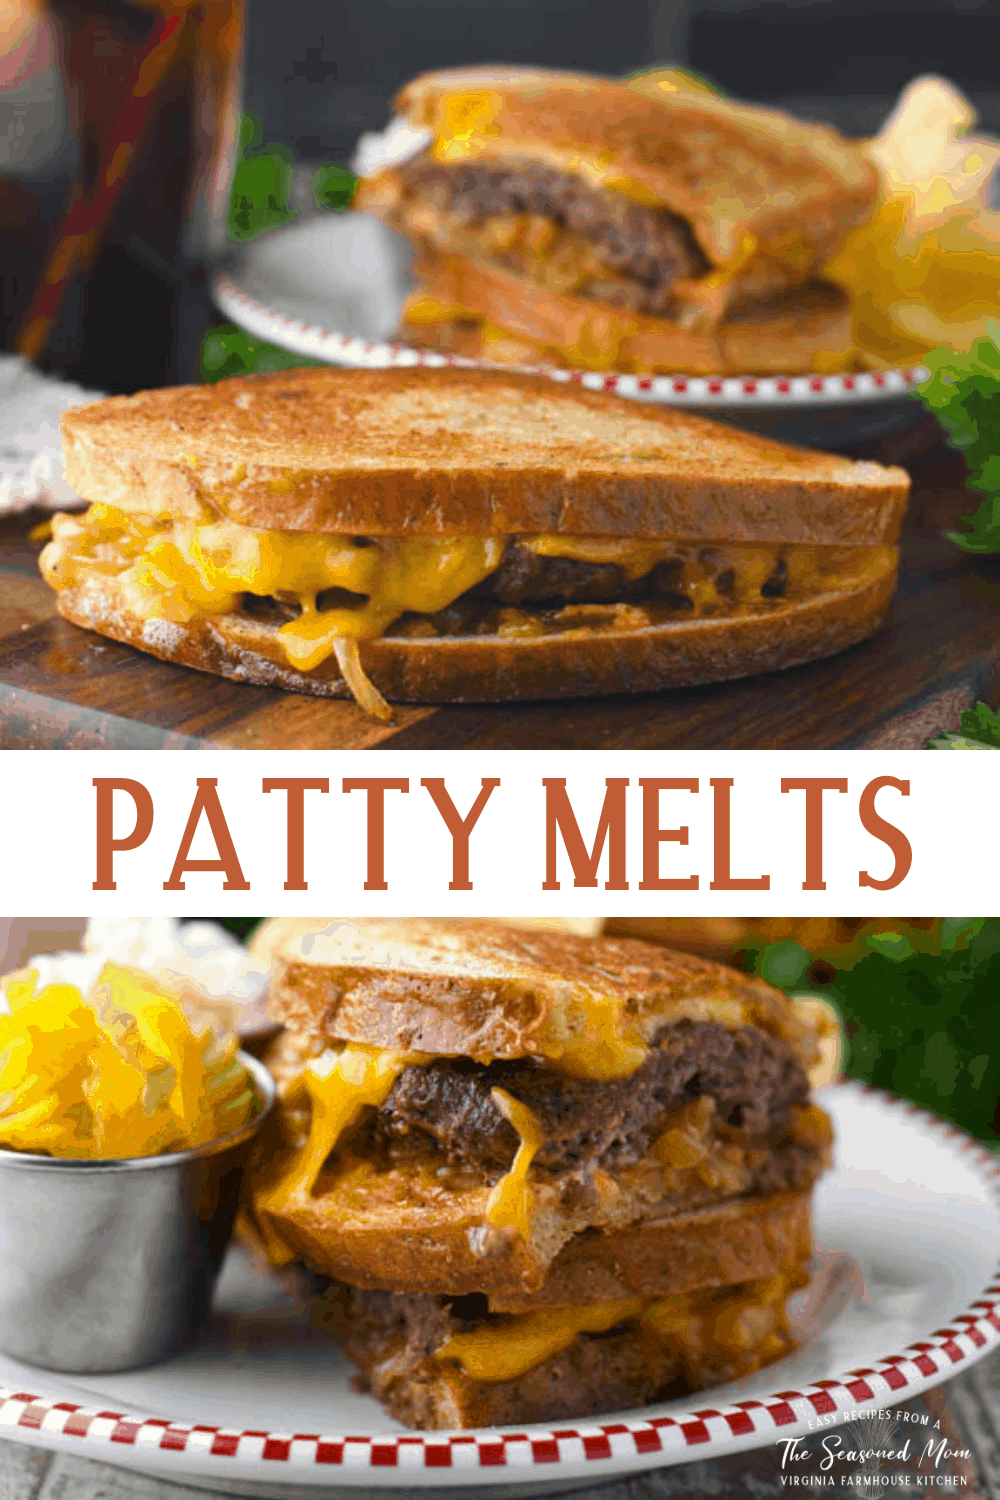 Long collage image of Patty Melt sandwiches